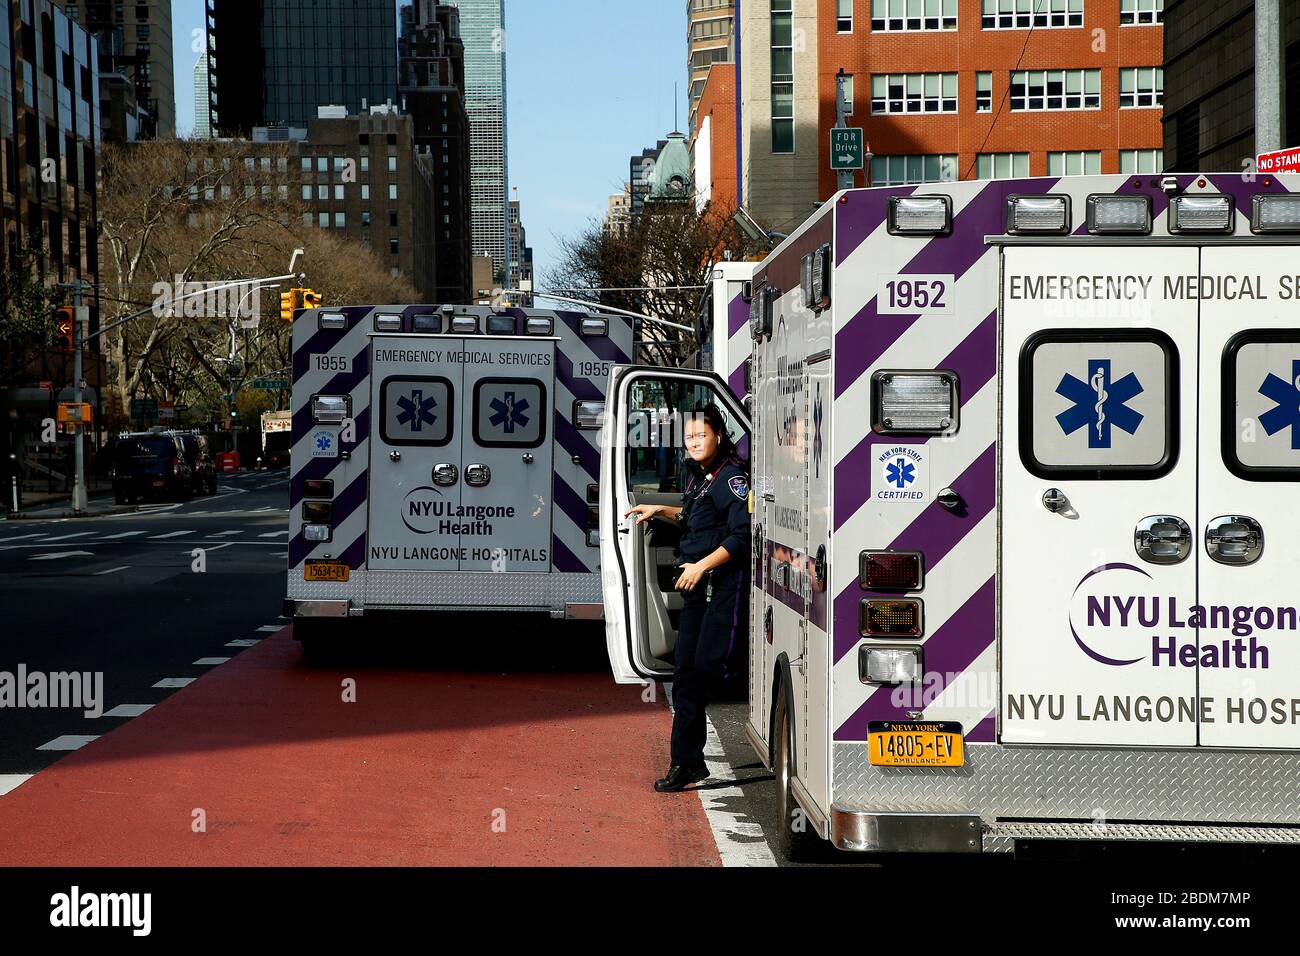 New York, United States. 07th Apr, 2020. An EMT exits an ambulance parked in front of NYU Langone Hospital. With the mounting cases of COVID-19, the call centers around the city have seen a 50 percent rise in 911 calls overwhelming the Emergency Services Technicians personnel. Consequently, FEMA has sent 250 ambulances and 500 EMT personnel to New York. Additionally, while there are no exact numbers of personal protective equipment (PPE) FEMA has sent to hospitals, shortages continue. Credit: SOPA Images Limited/Alamy Live News Stock Photo